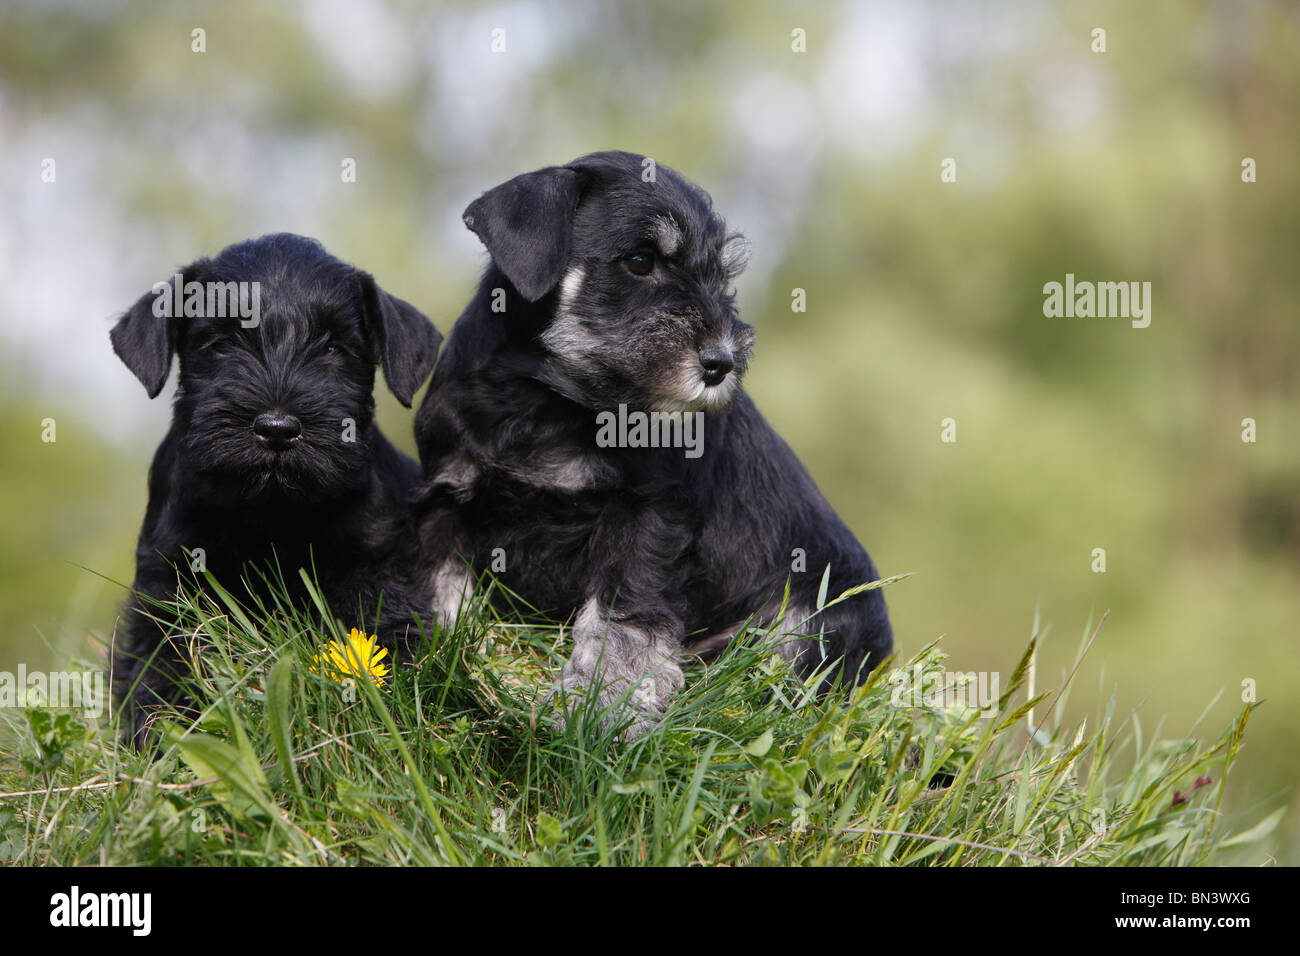 Miniature Schnauzer (Canis lupus f. familiaris), two puppies sitting in grass, Germany Stock Photo